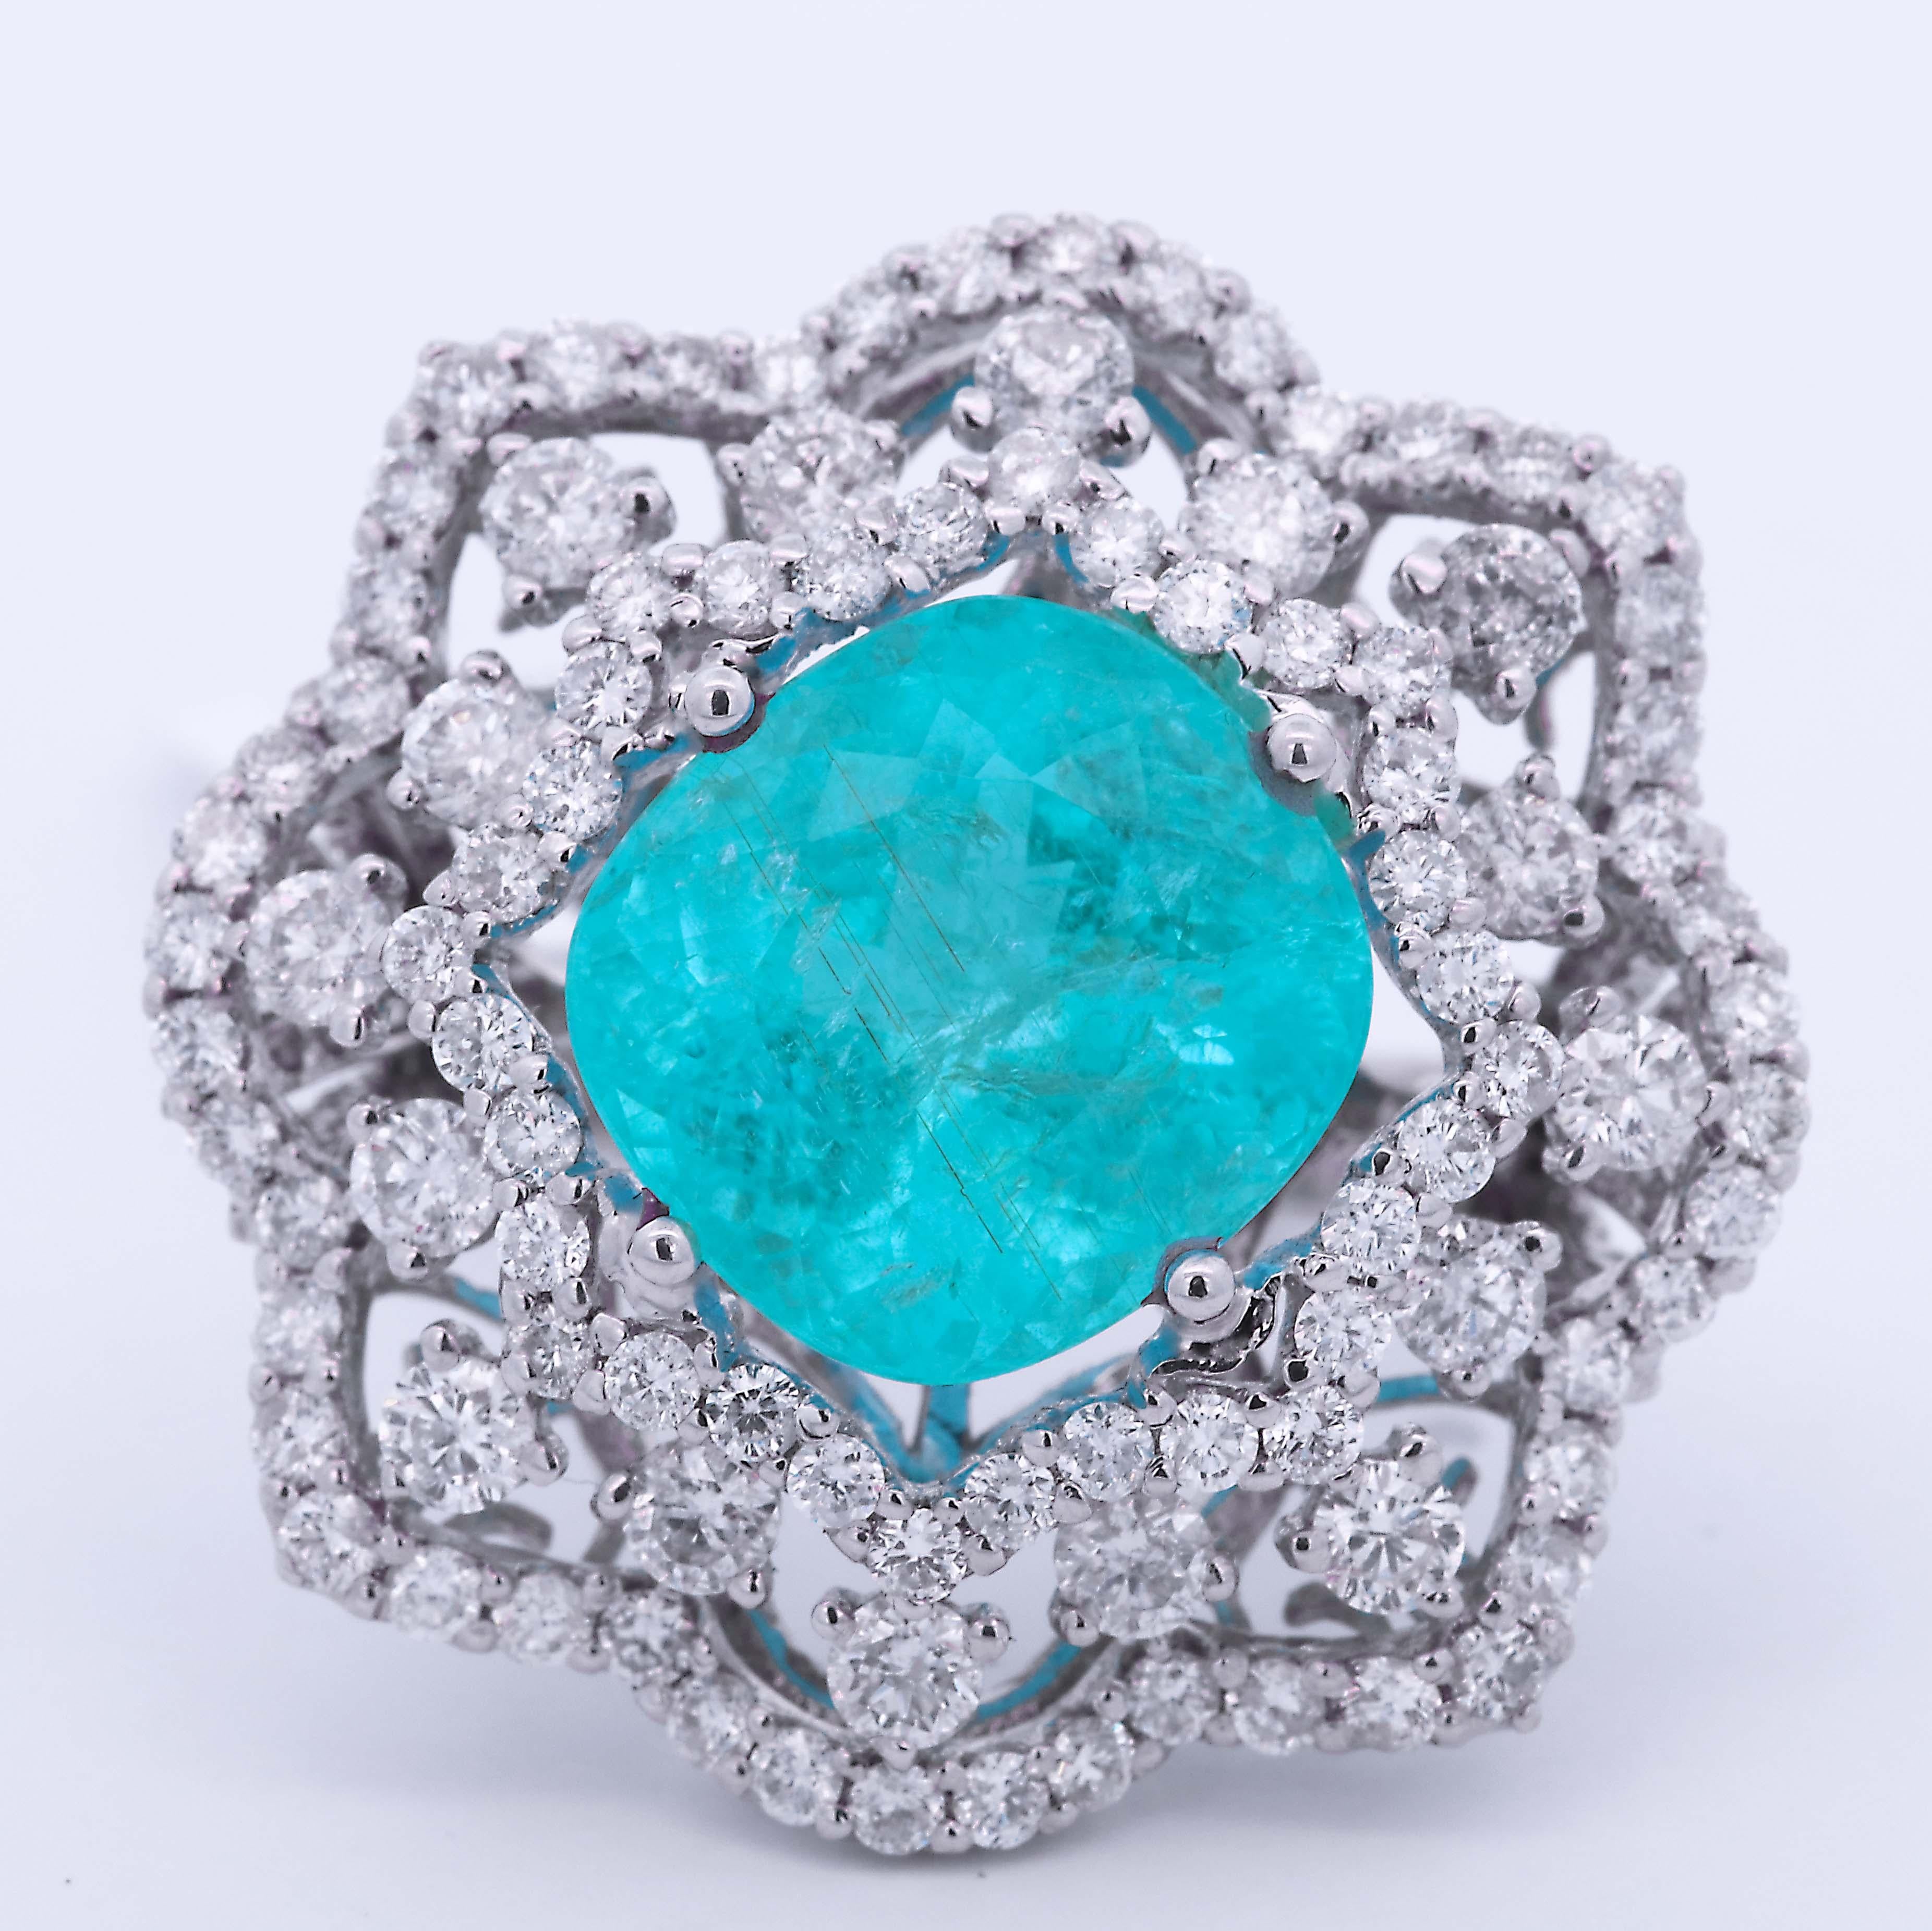 A stunning and vibrant GIA-certified 8.10 Carat Mozambique Paraiba, Tourmaline, and Diamond Gemstone Engagement Ring This beautiful 18-karat white gold ring features an exquisite paraiba tourmaline center stone. It is accented by an intricate design